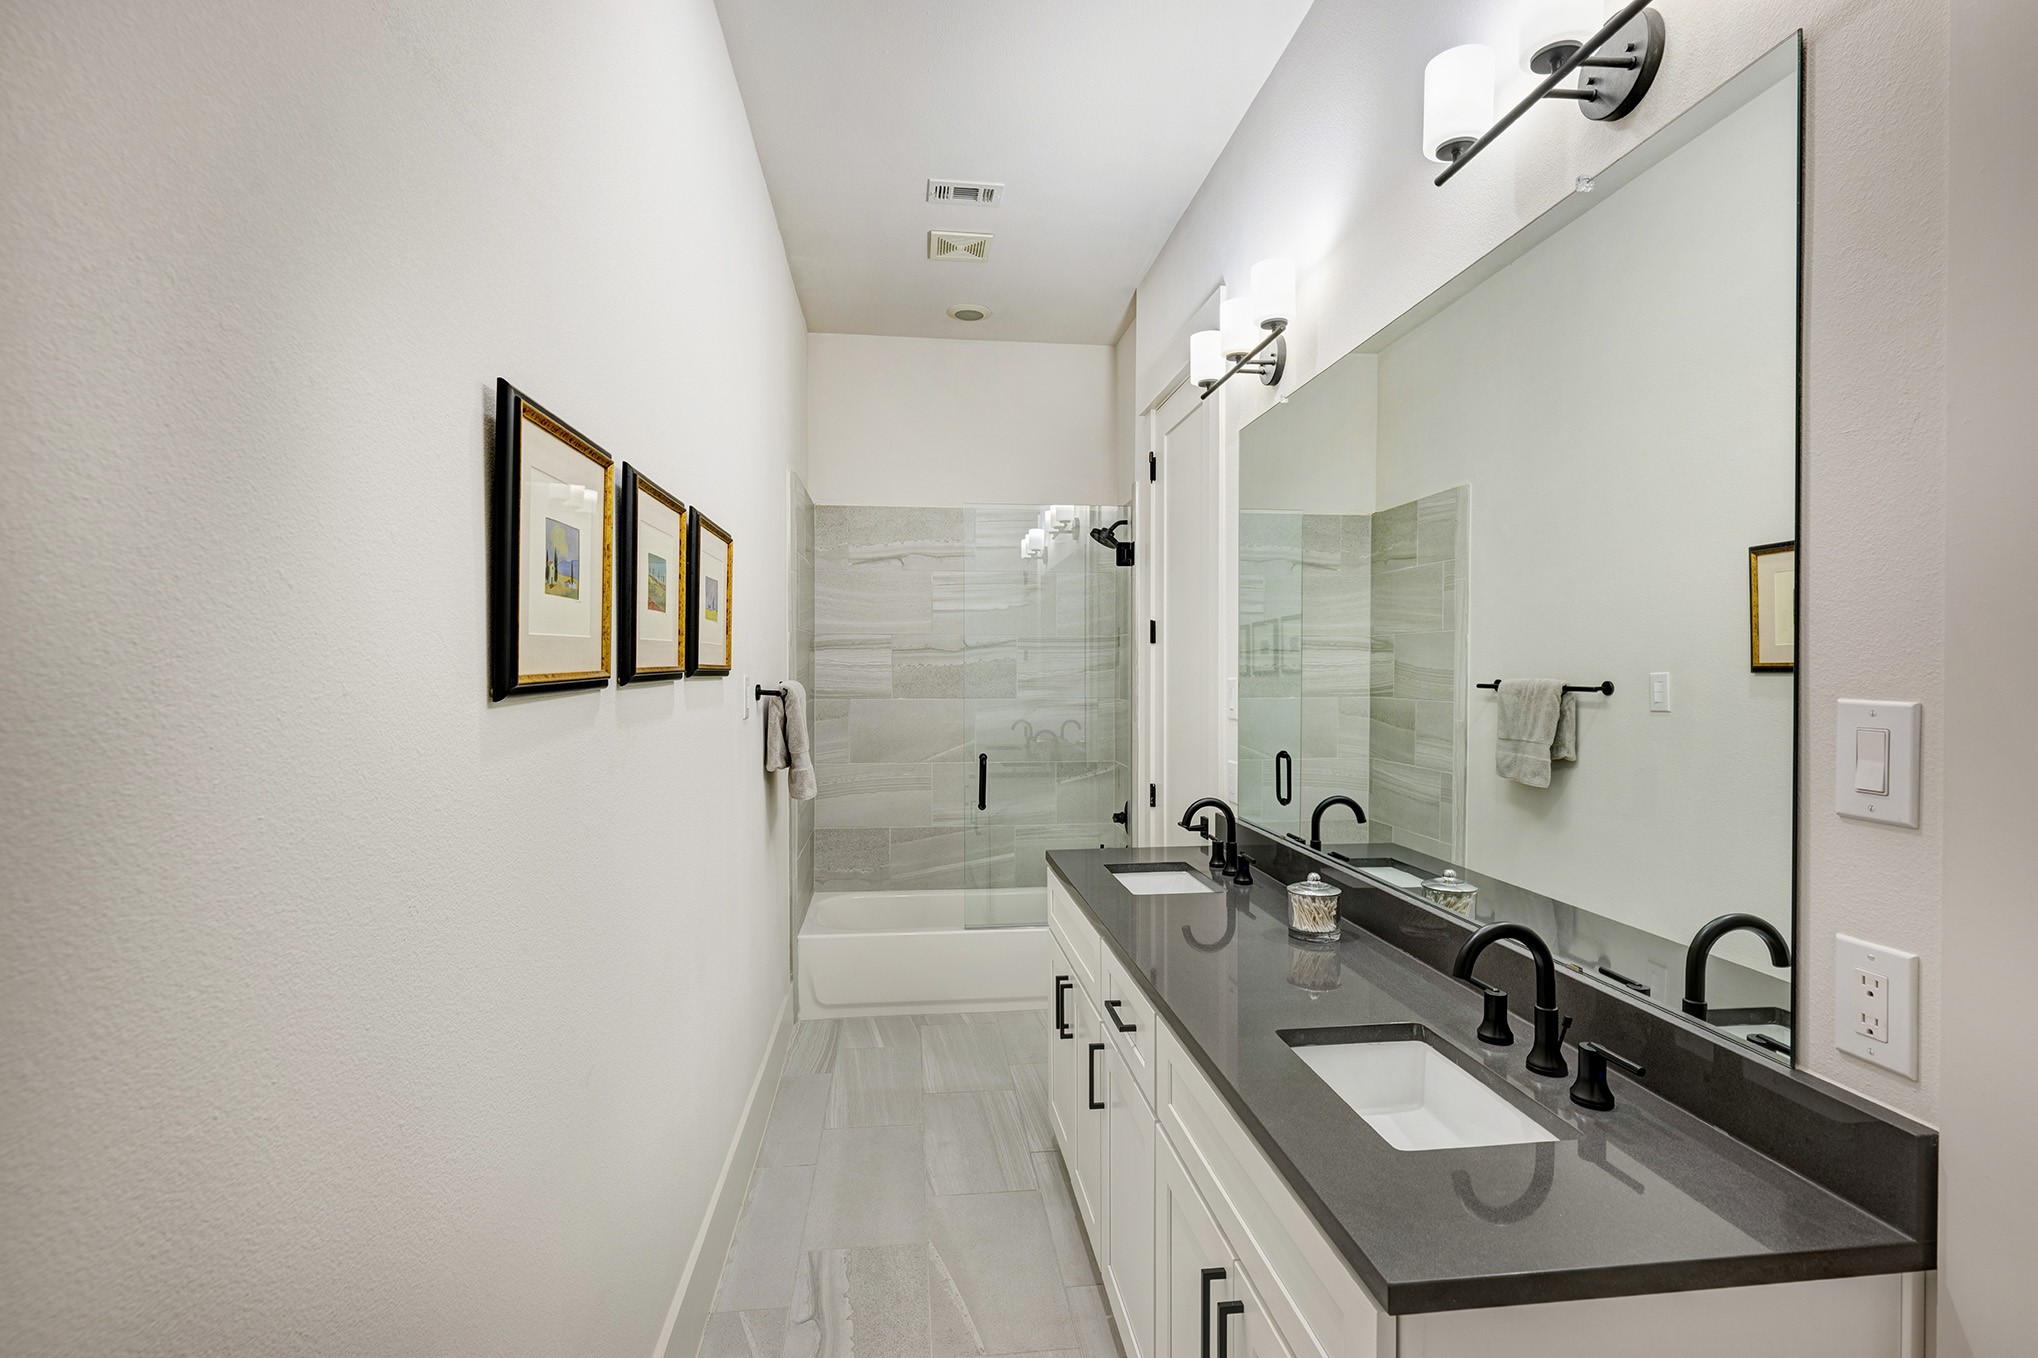 Hallway bathroom can be accessed from the hallway or the back secondary bedroom. Dual sinks, quartz counter, shower/tub and private water closet.